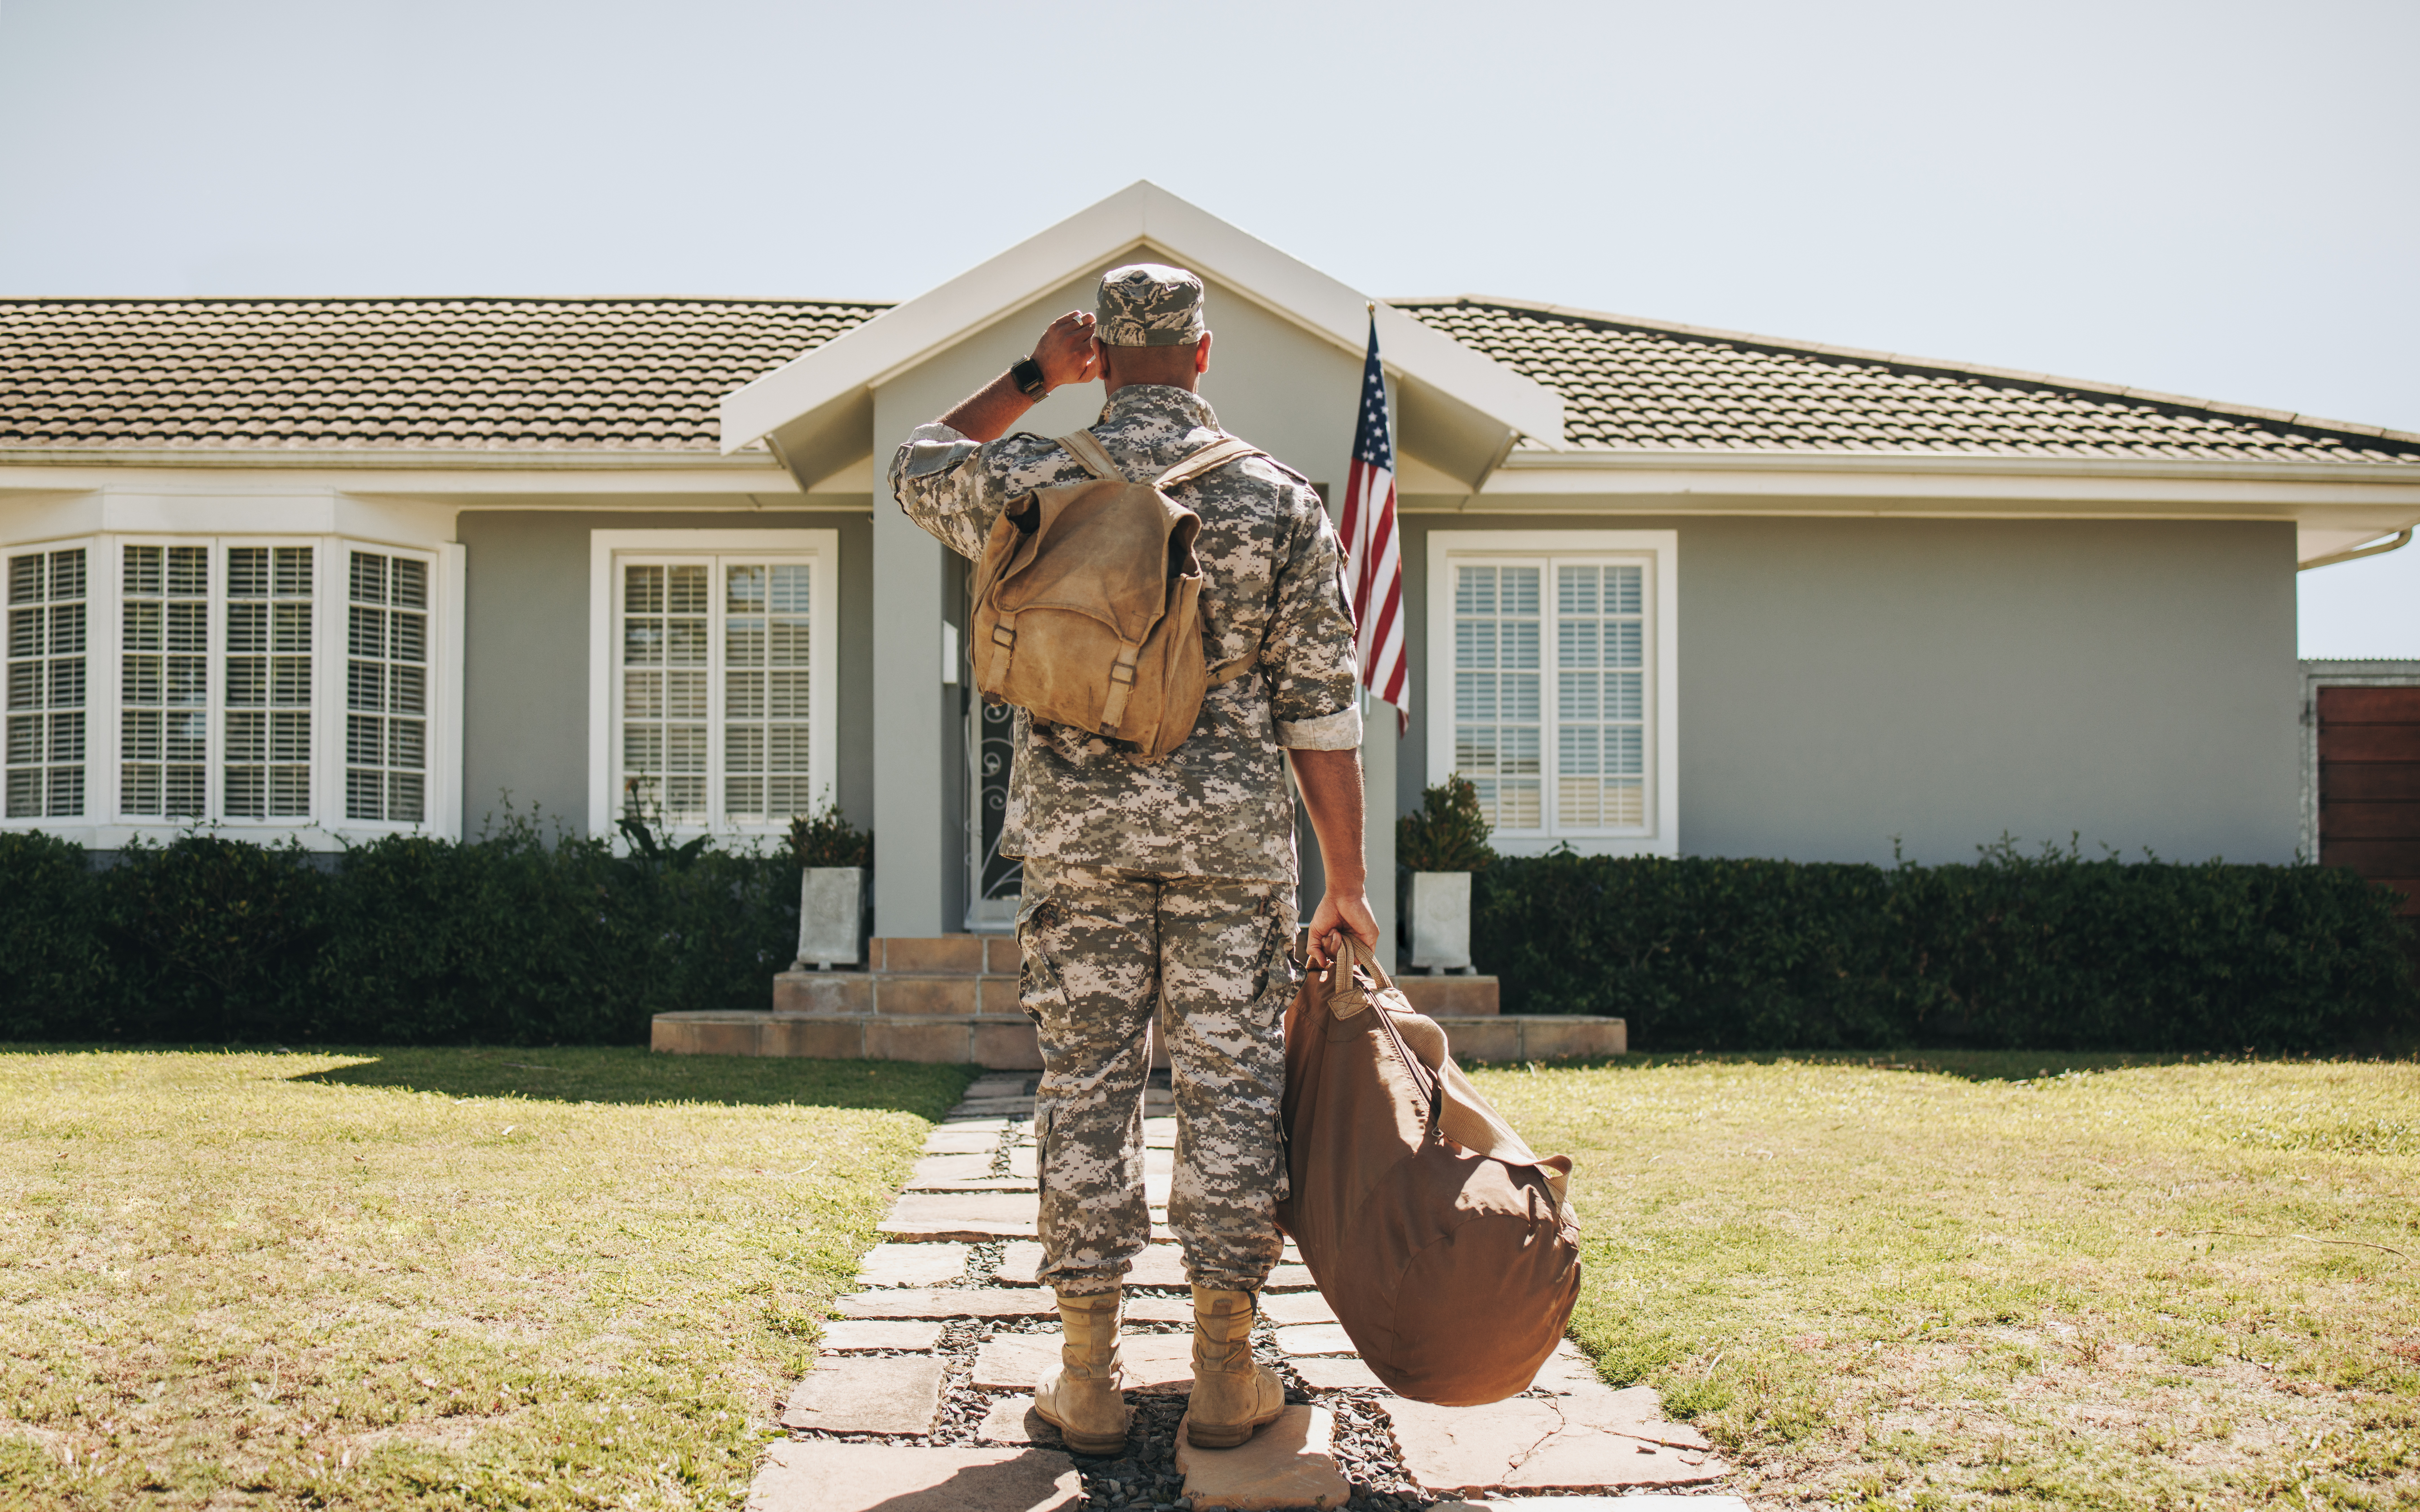 Solider returning home | Source: Getty Images